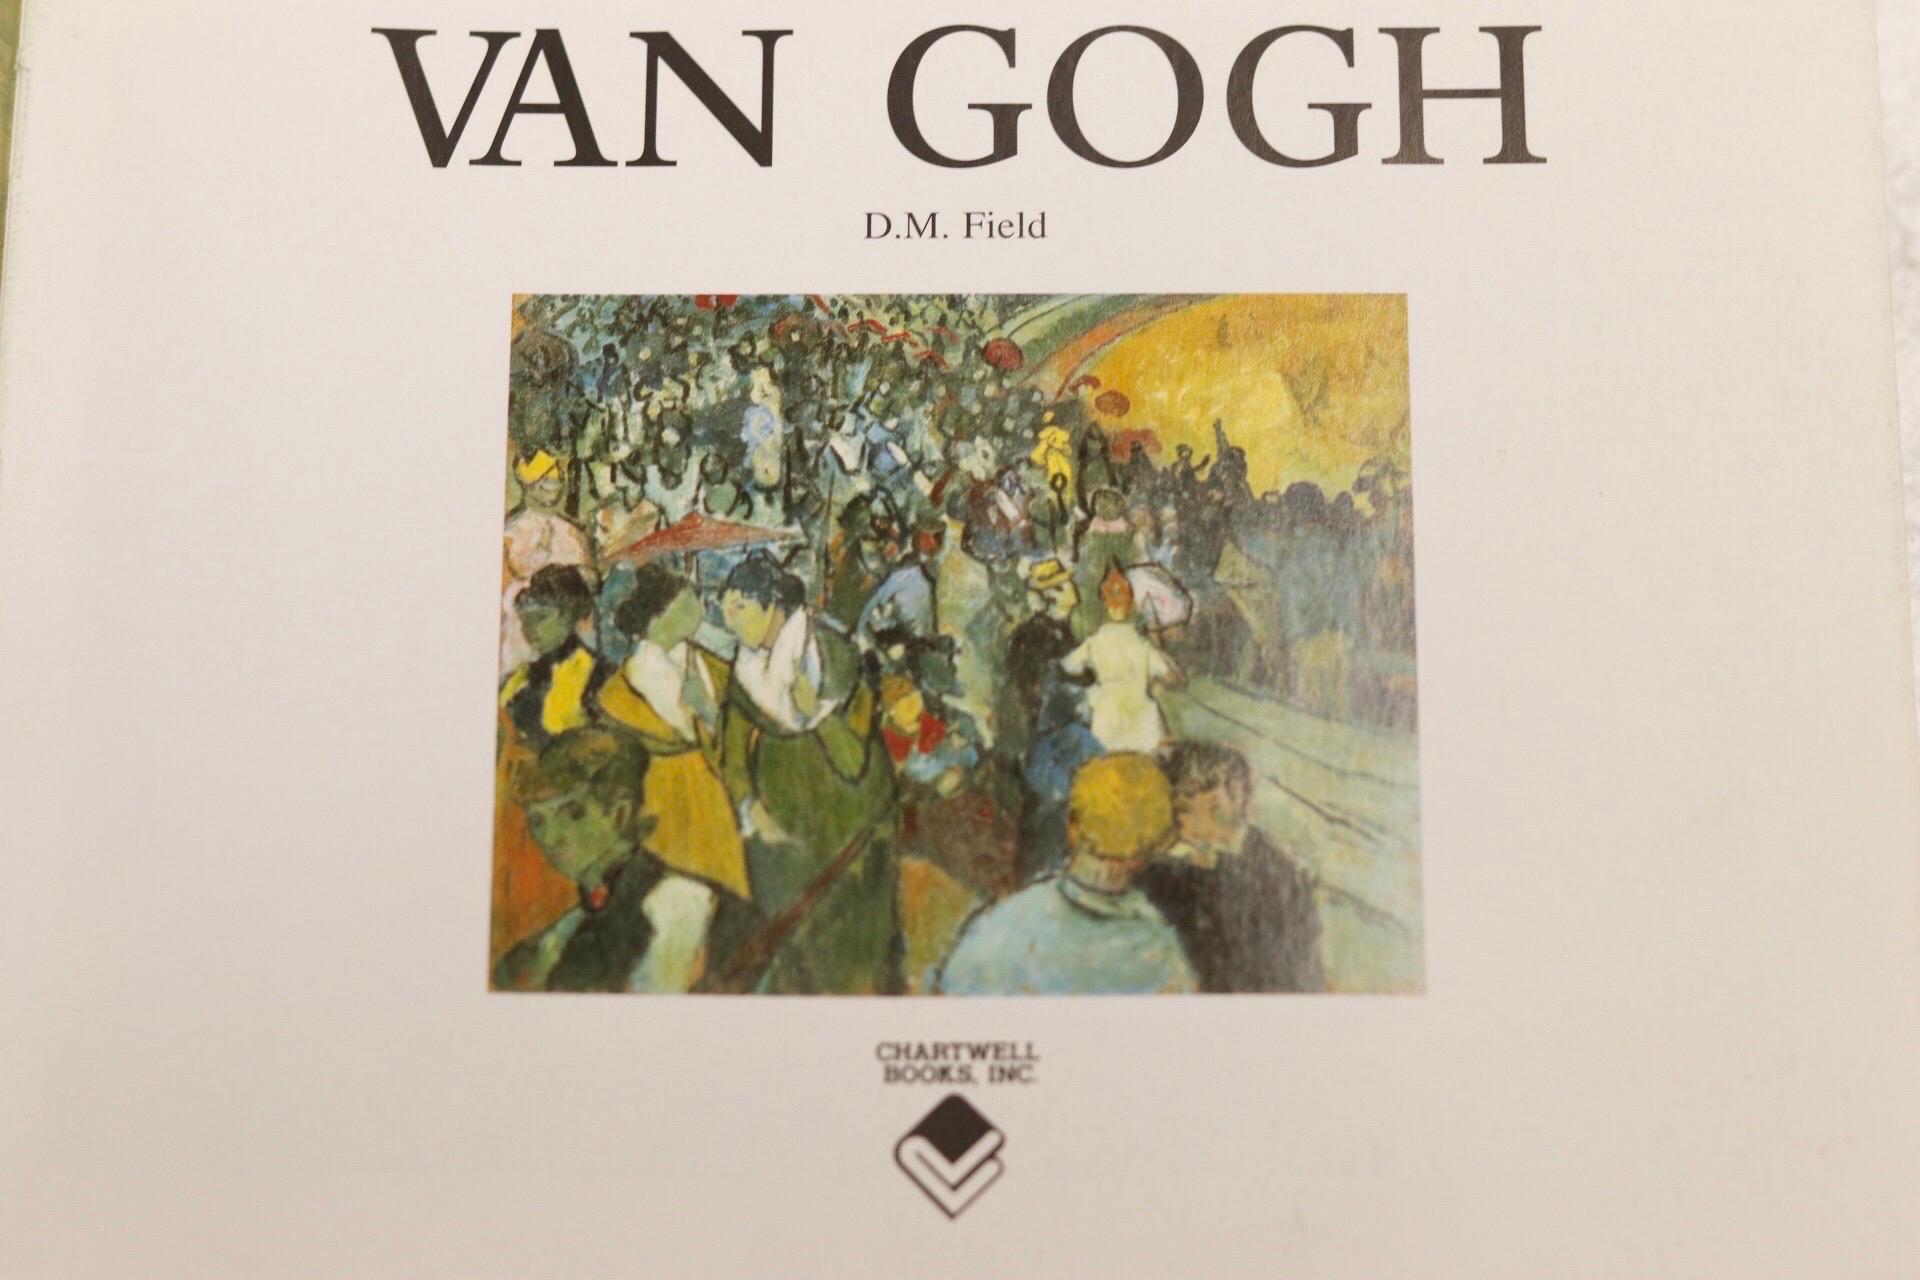 Van Gogh by D. M. Field. Softcover book, published in 2006 by Chartwell Books, Inc. Illustrated, 446 pages.